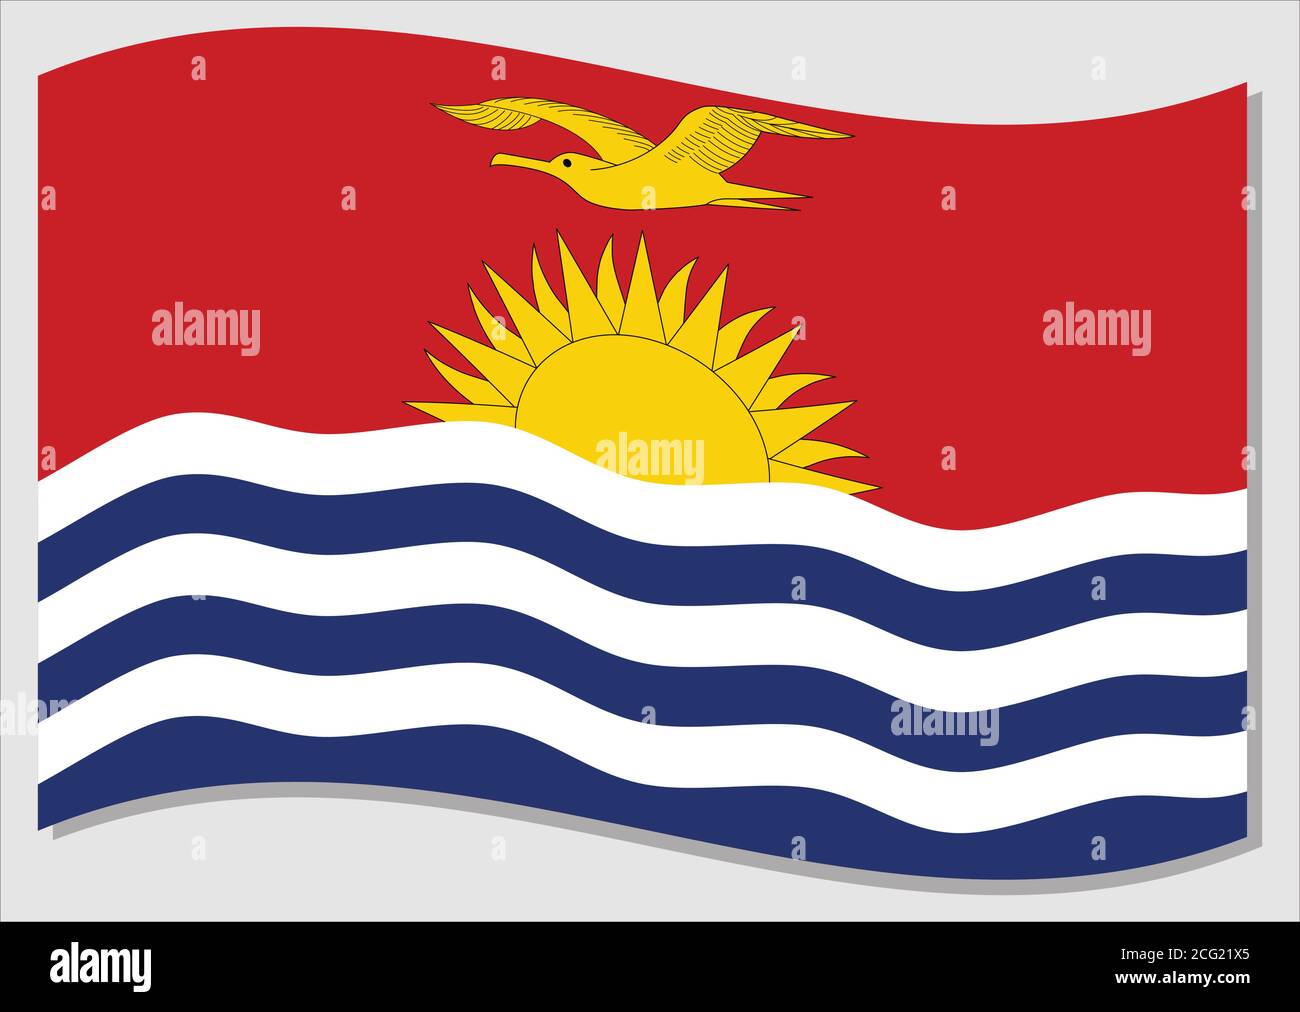 Waving flag of Kiribati vector graphic. Waving I-Kiribati flag illustration. Kiribati country flag wavin in the wind is a symbol of freedom and indepe Stock Vector